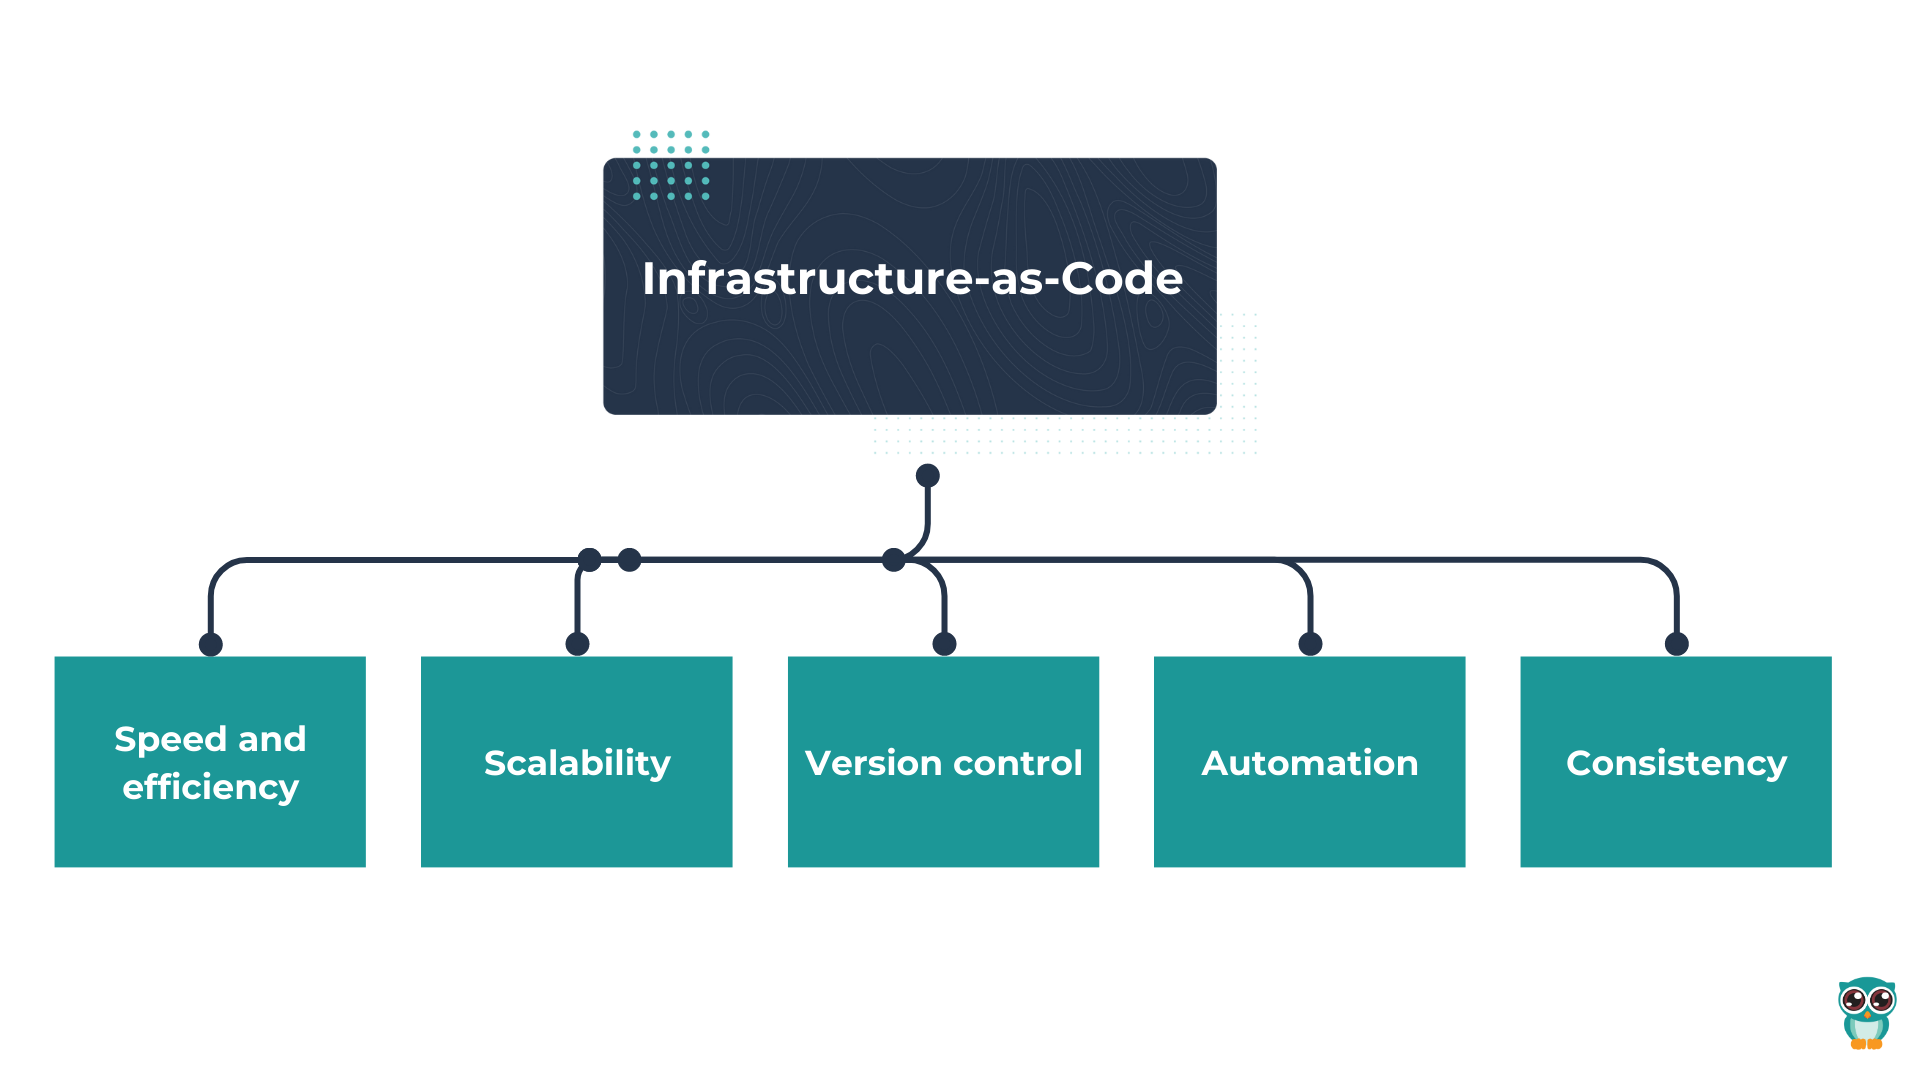 Infrastructure-as-Code blog post